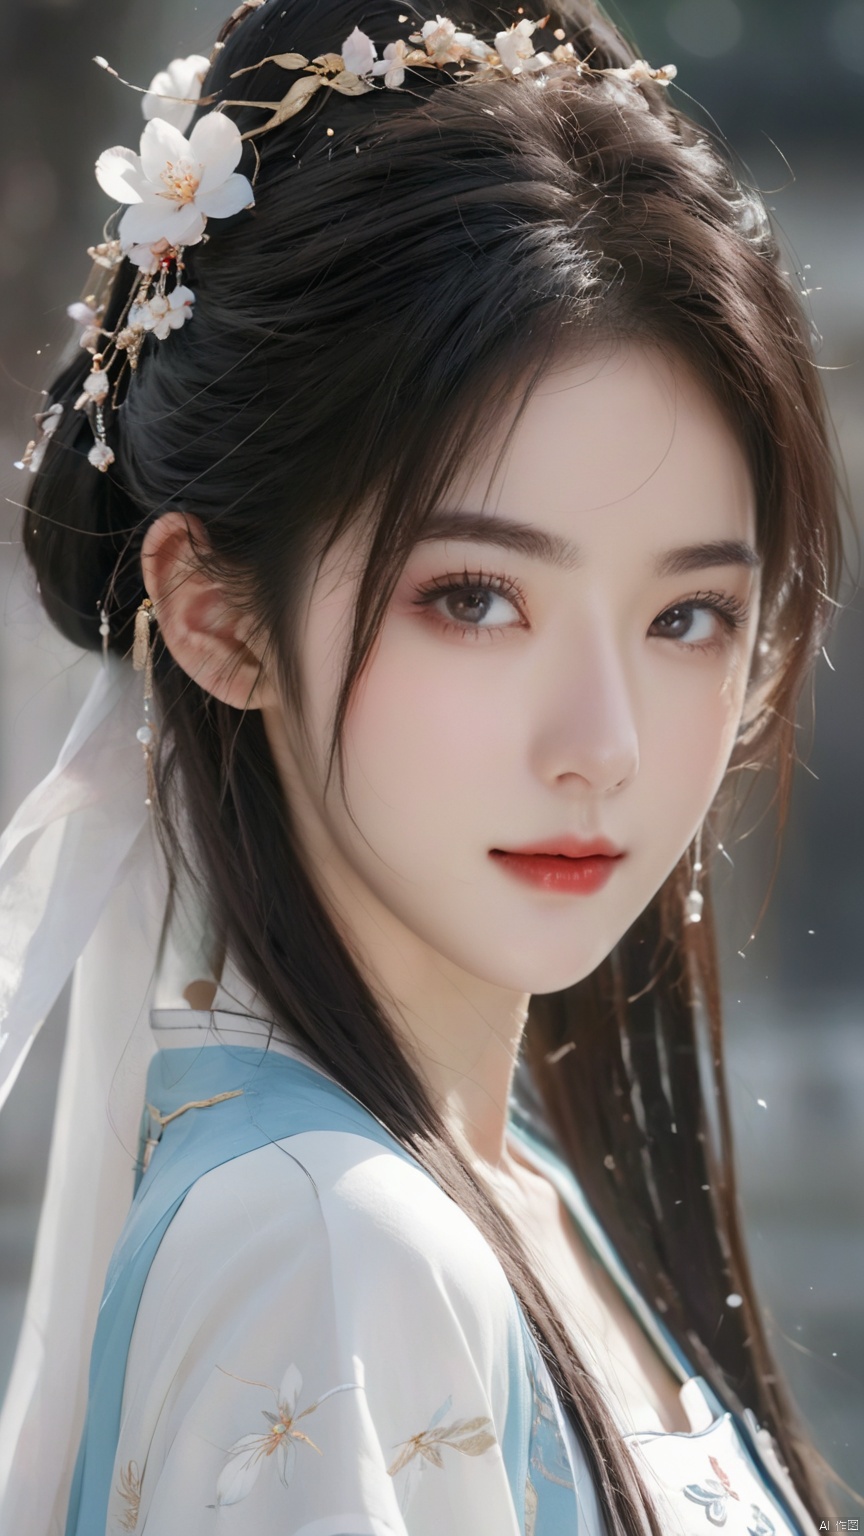  daxiushan, daxiushan style, hanfu,red,red lipstick,simple_black_background, black and gloden theme, Sense of coordination, sense of order, mathematics beauty, (((cover design))),(((((cover art))))),((trim)), official art, girl, solo, chess_girl, perfect_detail_girl, pretty, white hair, long hair, head flower,(delicate and beautiful eyes), looking at viewer, cute face, pretty face, blue_eyes, white skin, white body, navel, perfect body, body art, standing on, beautiful pose, crystal_art, huge_black_crystal, blooming_effect, whit_magic_circle_behind_girl, White petal, perfecteyes,hanfu,upper body ratio of 0.9, looking directly at the camera, realistic, raw photo, digital SLR camera, film grain, Fujifilm XT3 camera, daytime shot, one girl, goddess-like maiden, see-through ratio of 4:1.4,deserted street ratio of 1.3, backlit, bokeh, contrast filters, smile ratio of 0.8, direct gaze, Chinese ancient town style ratio of 1.1, cherry blossoms, wet, light mastery, Hosino, large breasts ratio of 1.8.